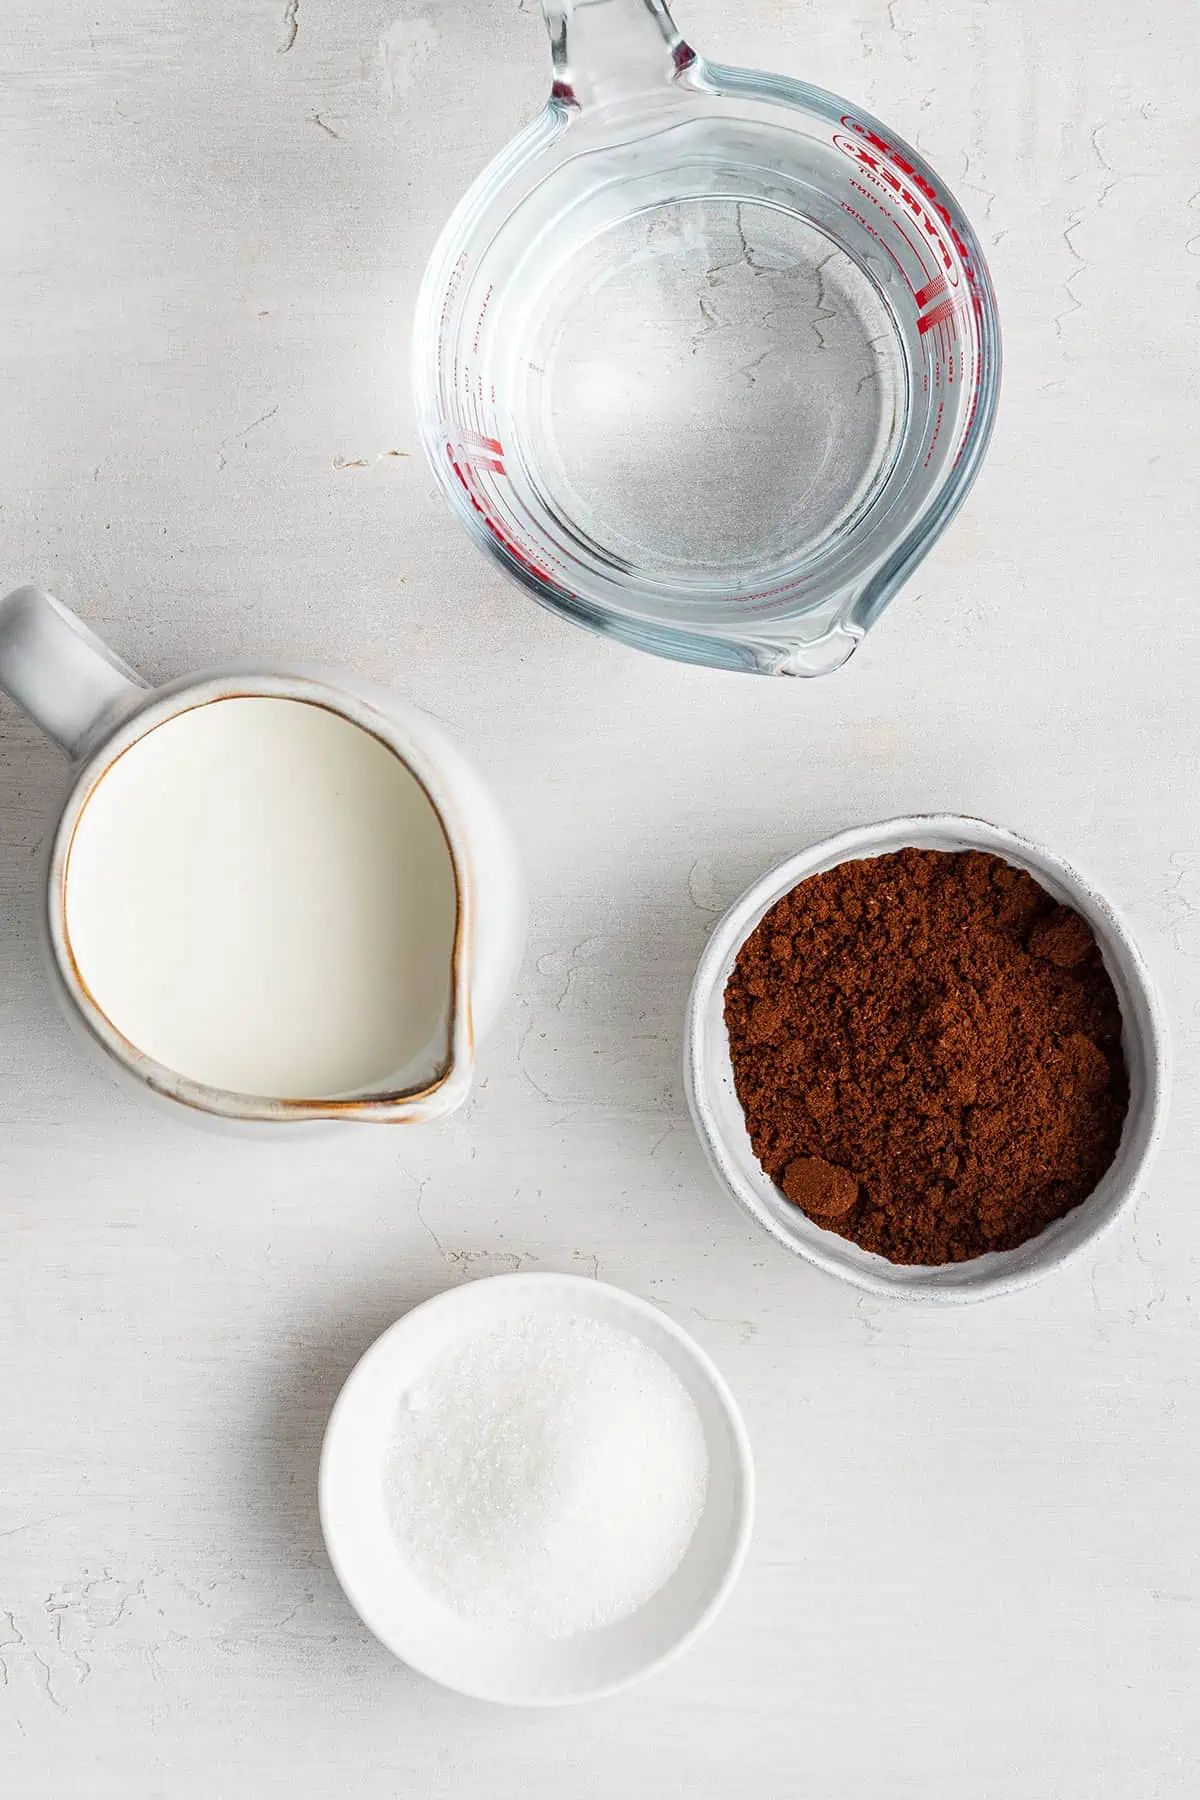 Overhead view of the ingredients needed for cortaditos: a bowl of coffee grounds, a bowl of sugar, a pitcher of evaporated milk, and a pyrex of water